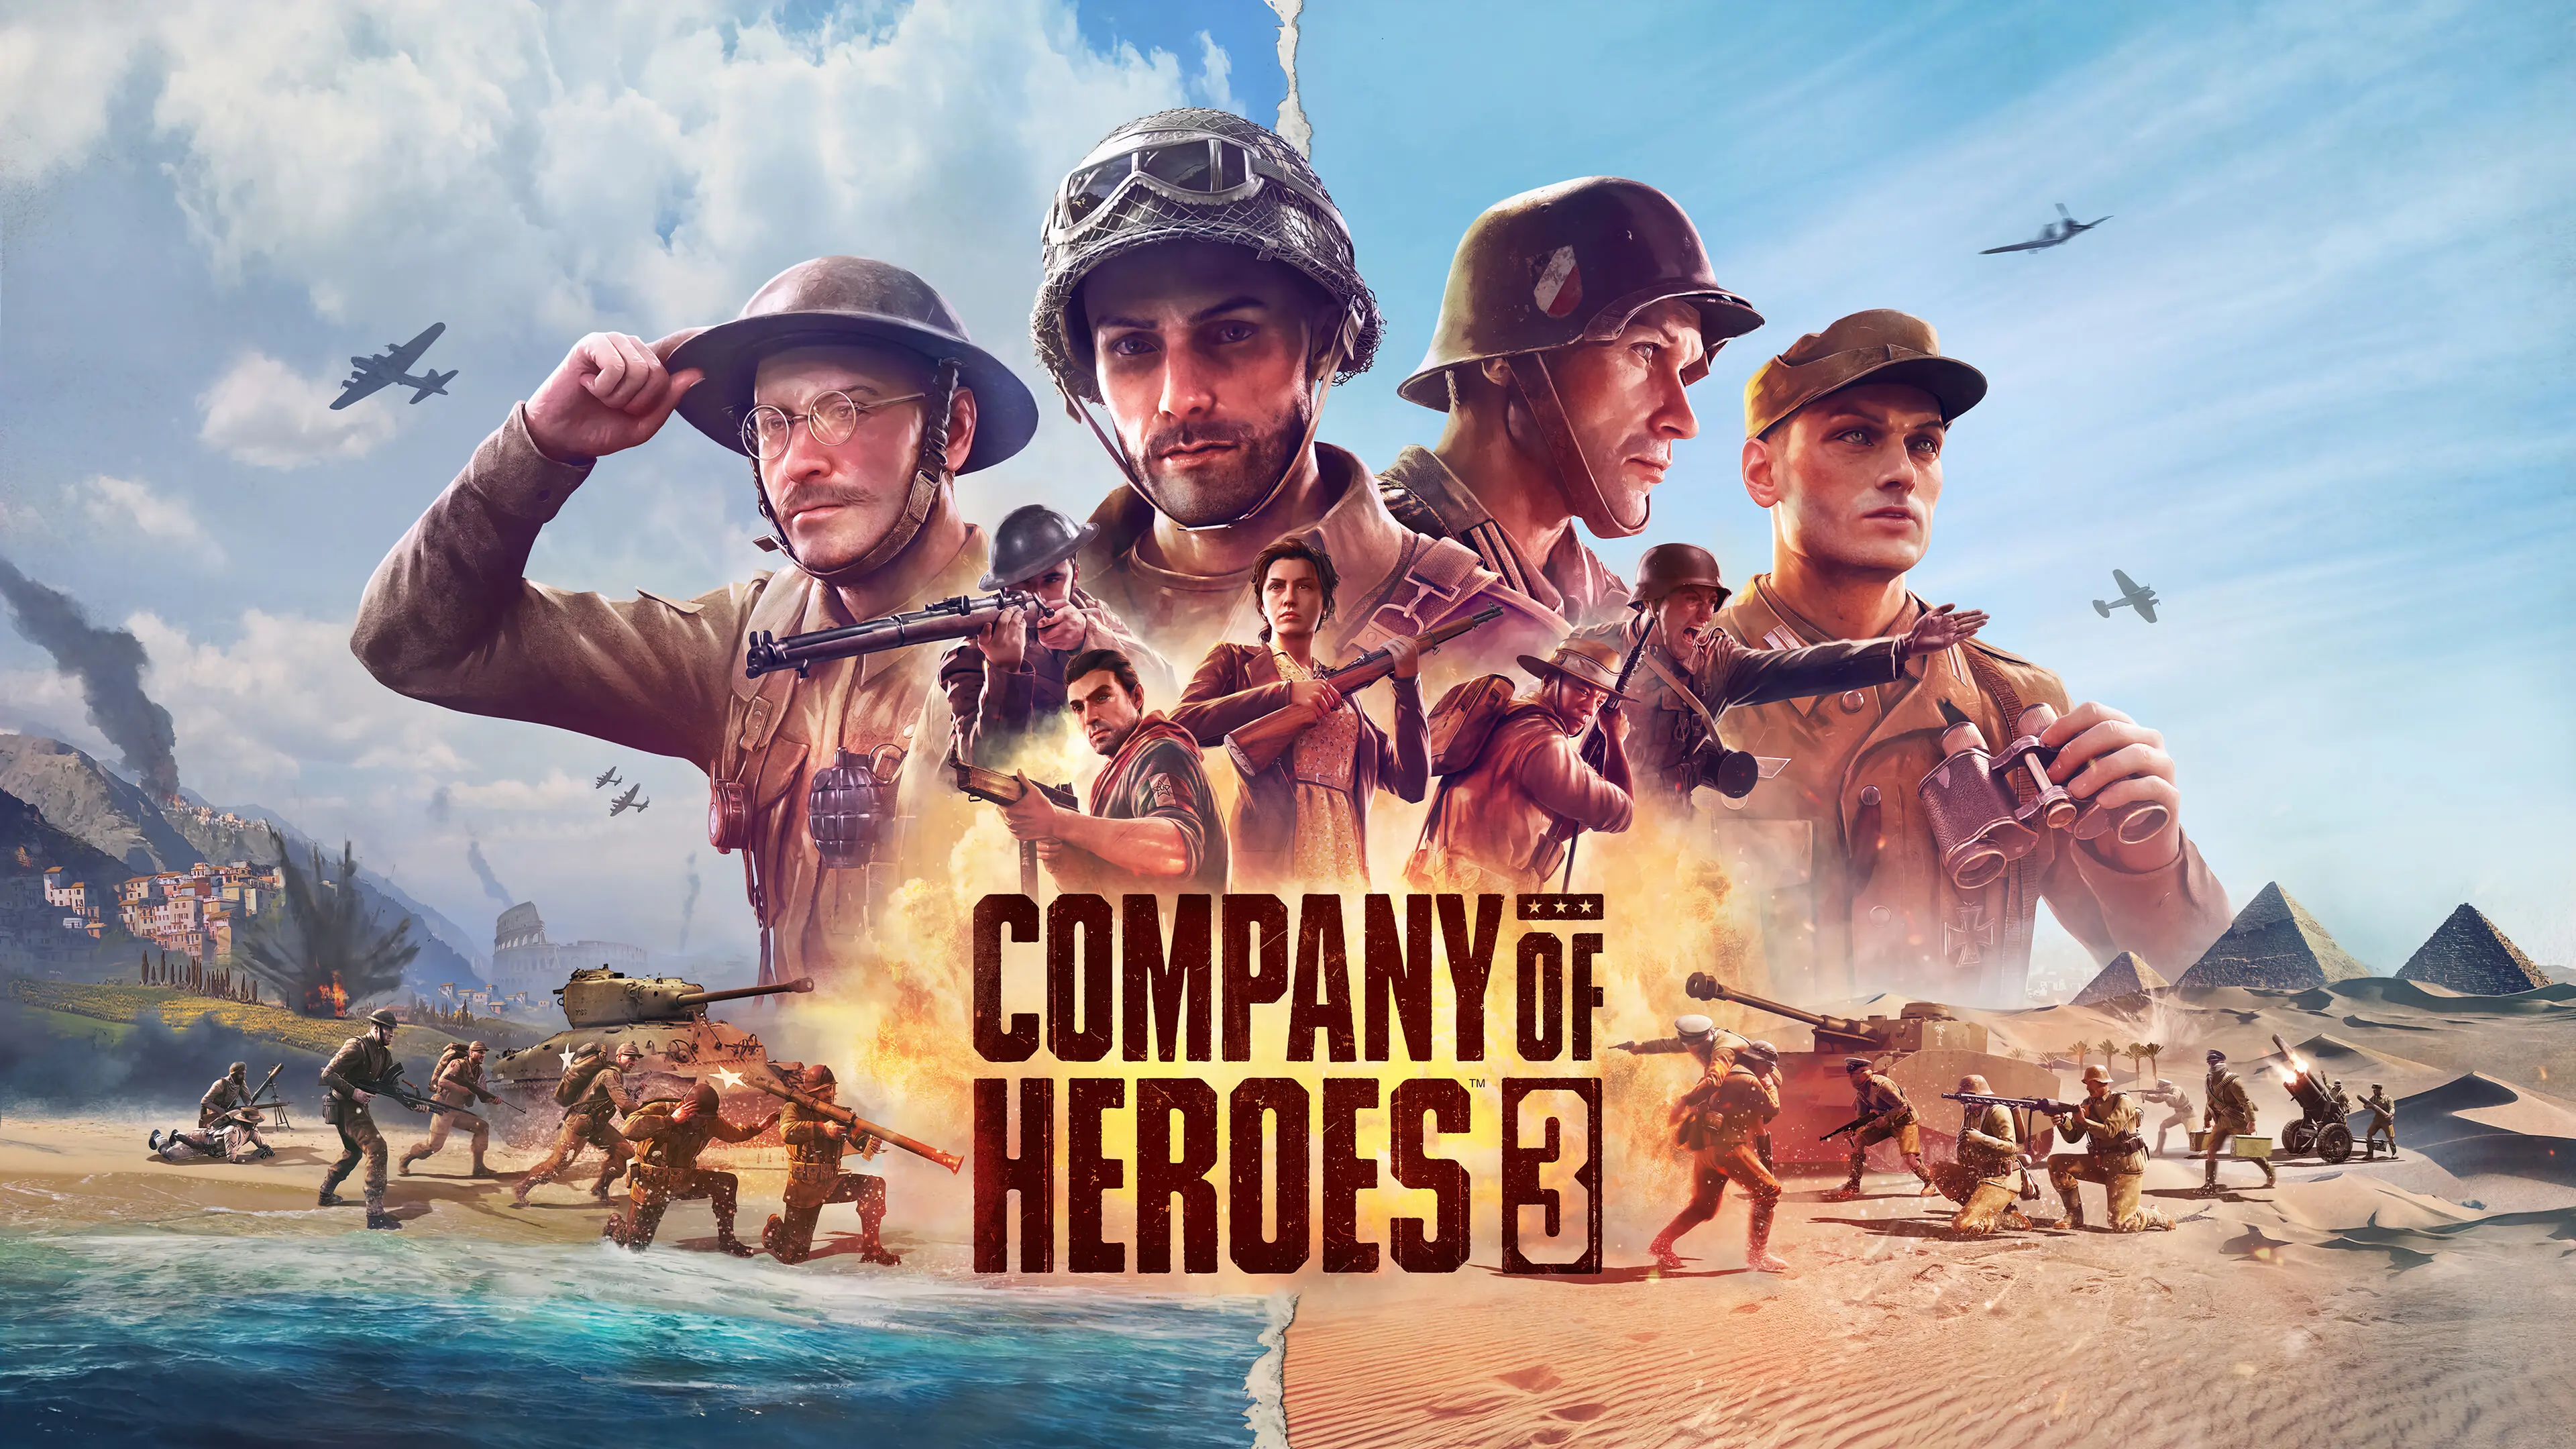 Game Company of Heroes 3 wallpaper 2 | Background Image